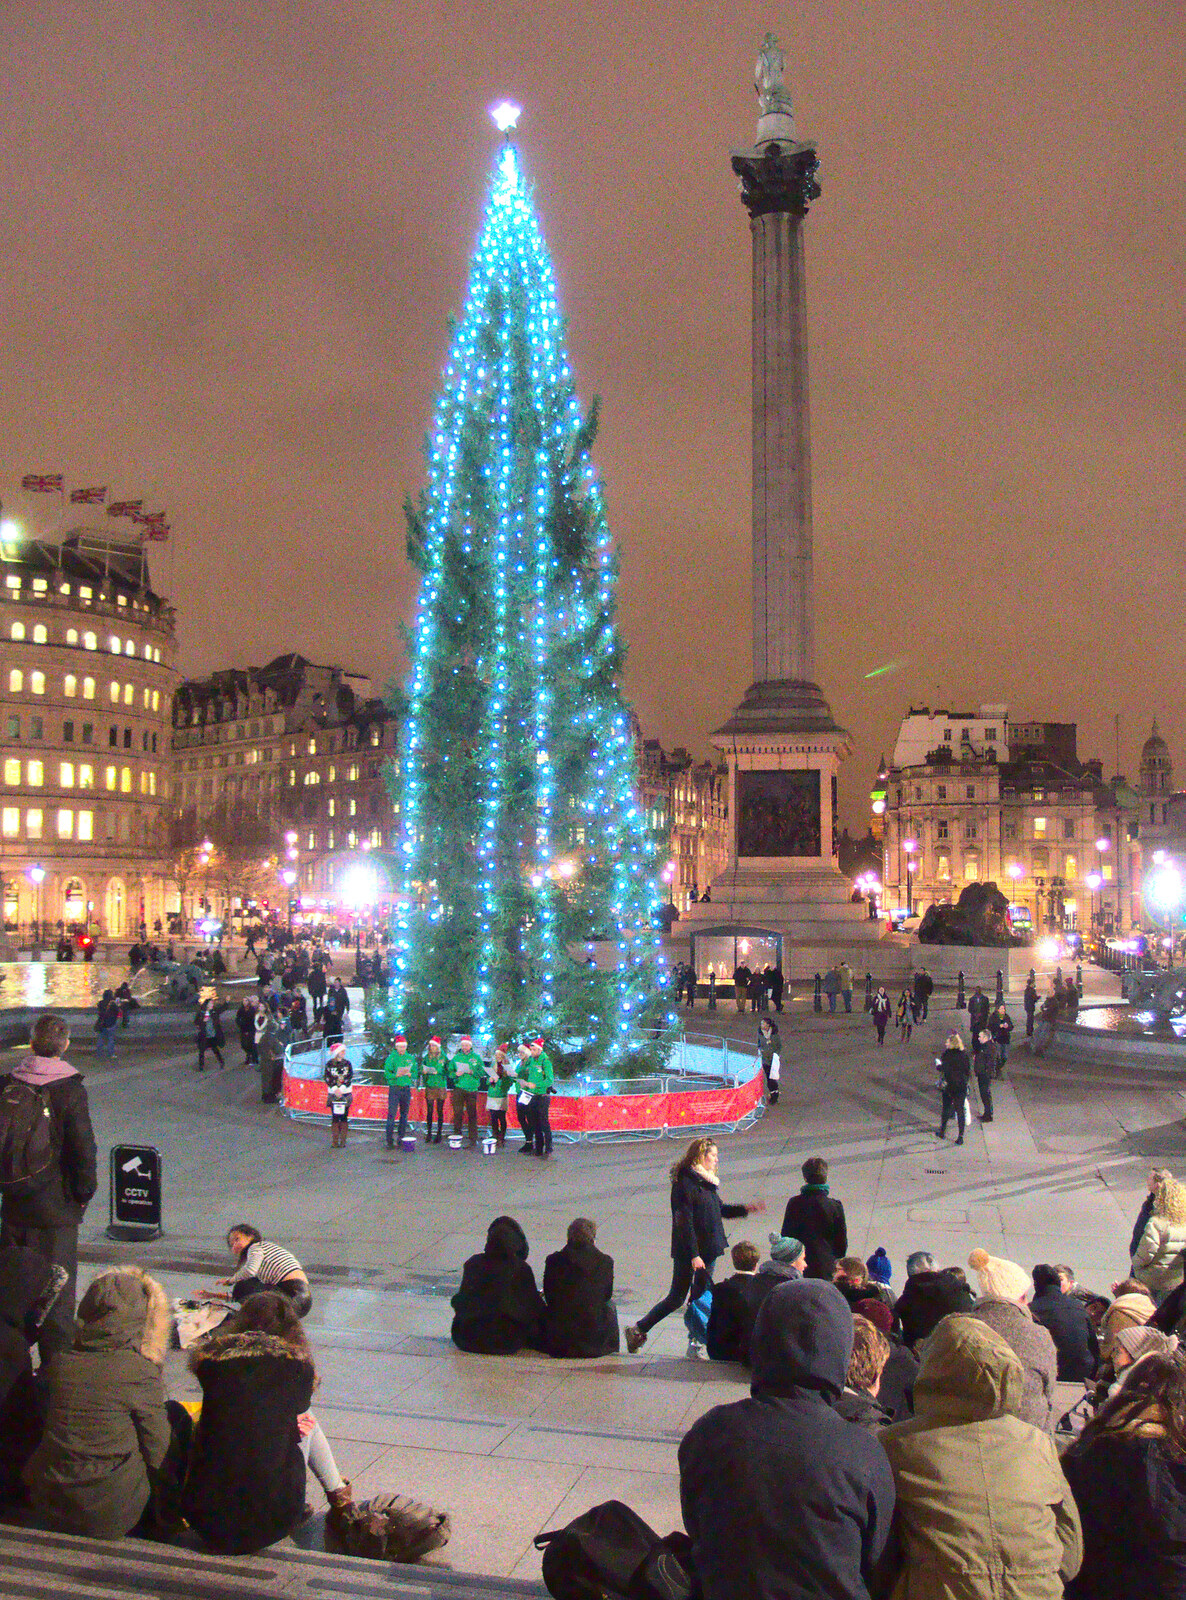 The Norwegian Christmas tree and Nelson's Column from SwiftKey Innovation Nights, Westminster, London - 19th December 2014